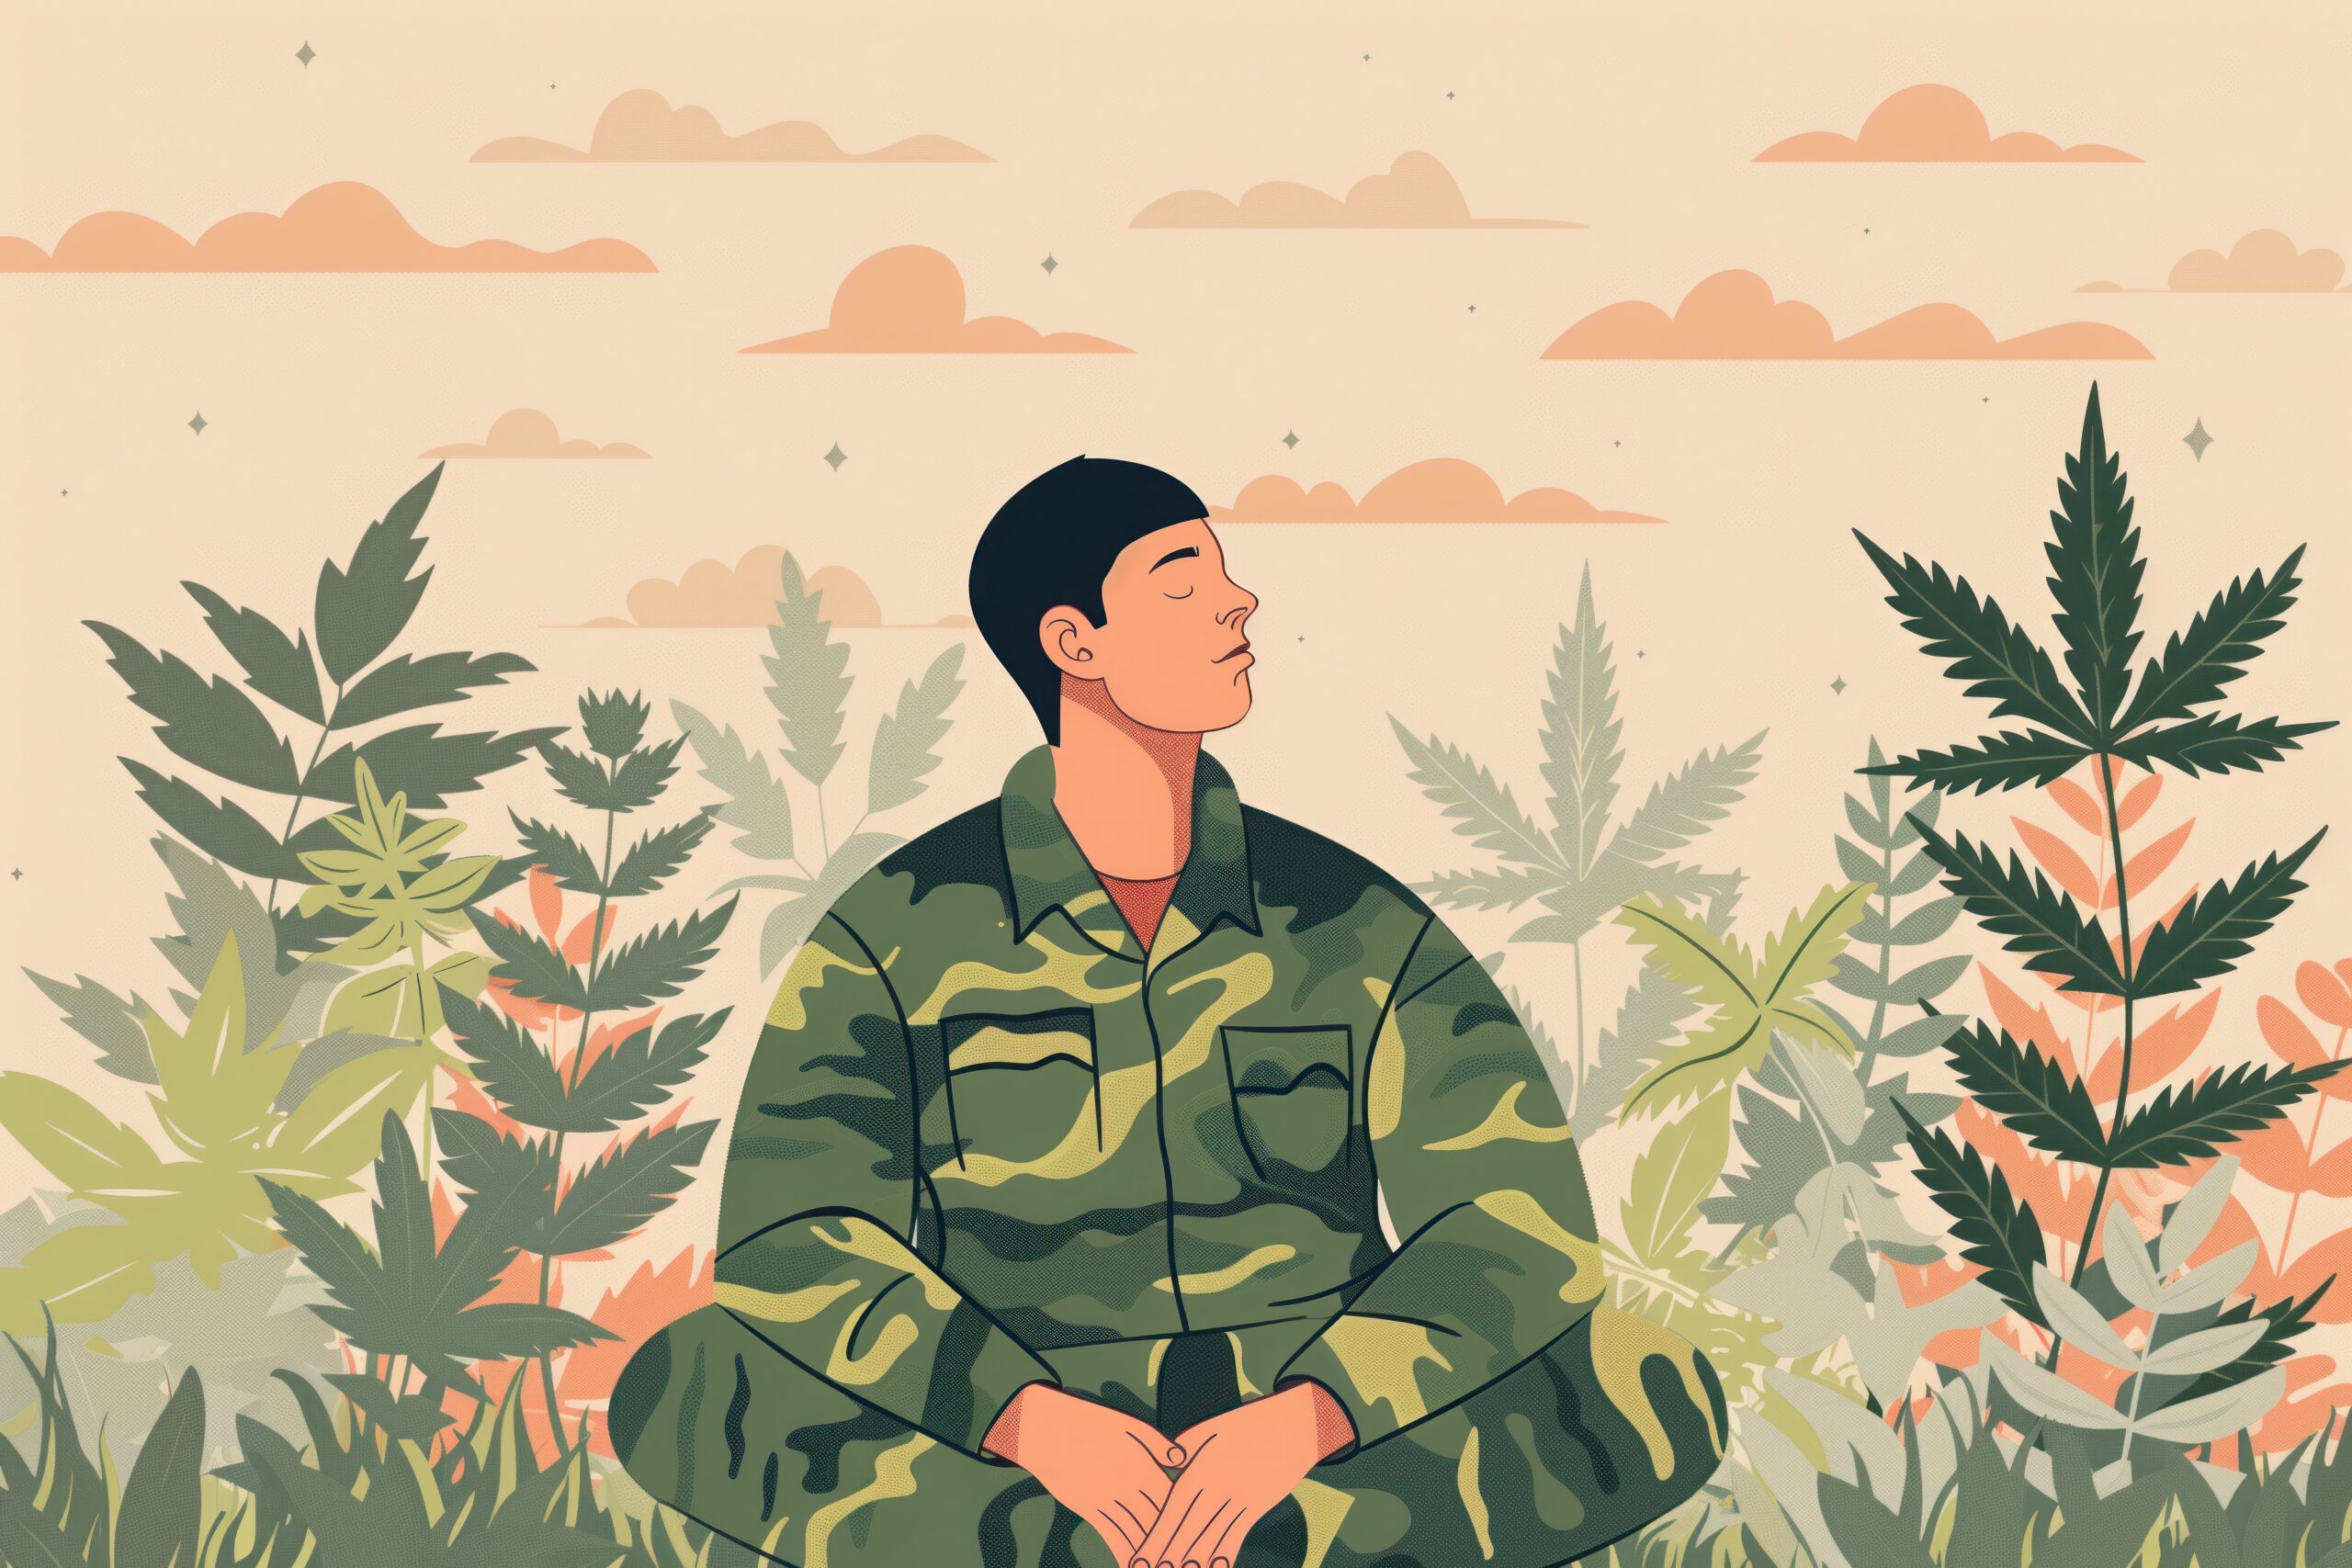 Military man calmed down by cannabis, treats post traumatic disorder PTSD using medical marijuana. The concept of medical cannabis for treatment PTSD in military